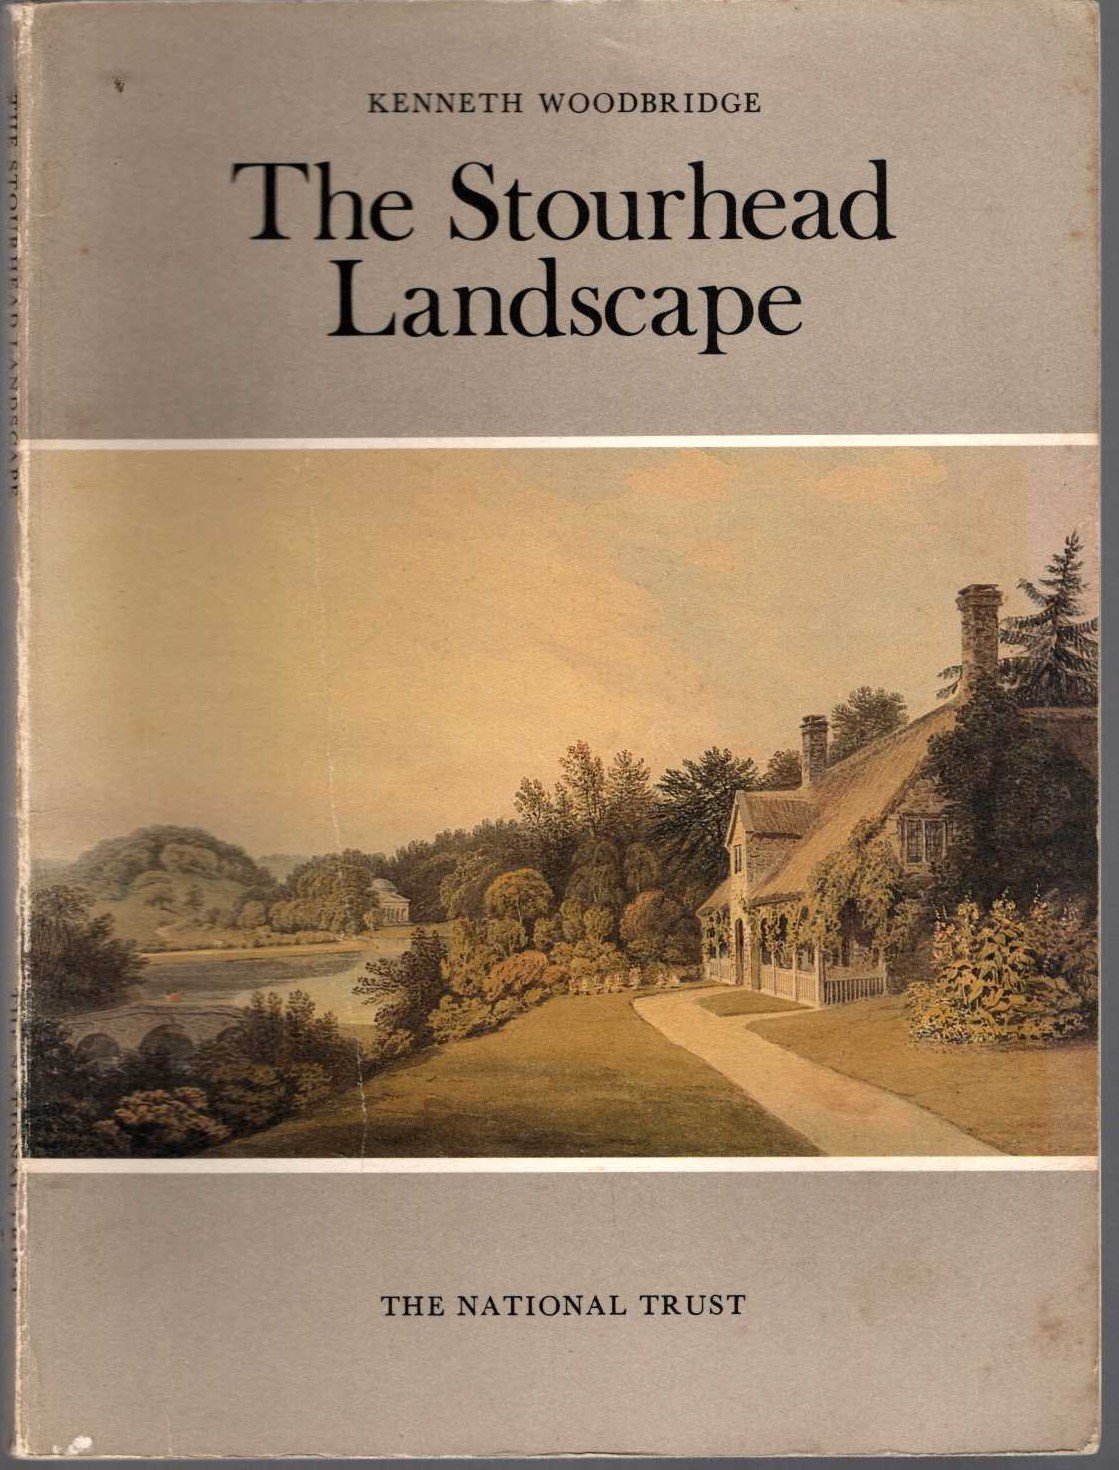 \ THE STOURHEAD LANDSCAPE by Kenneth Woodbridge front book cover image